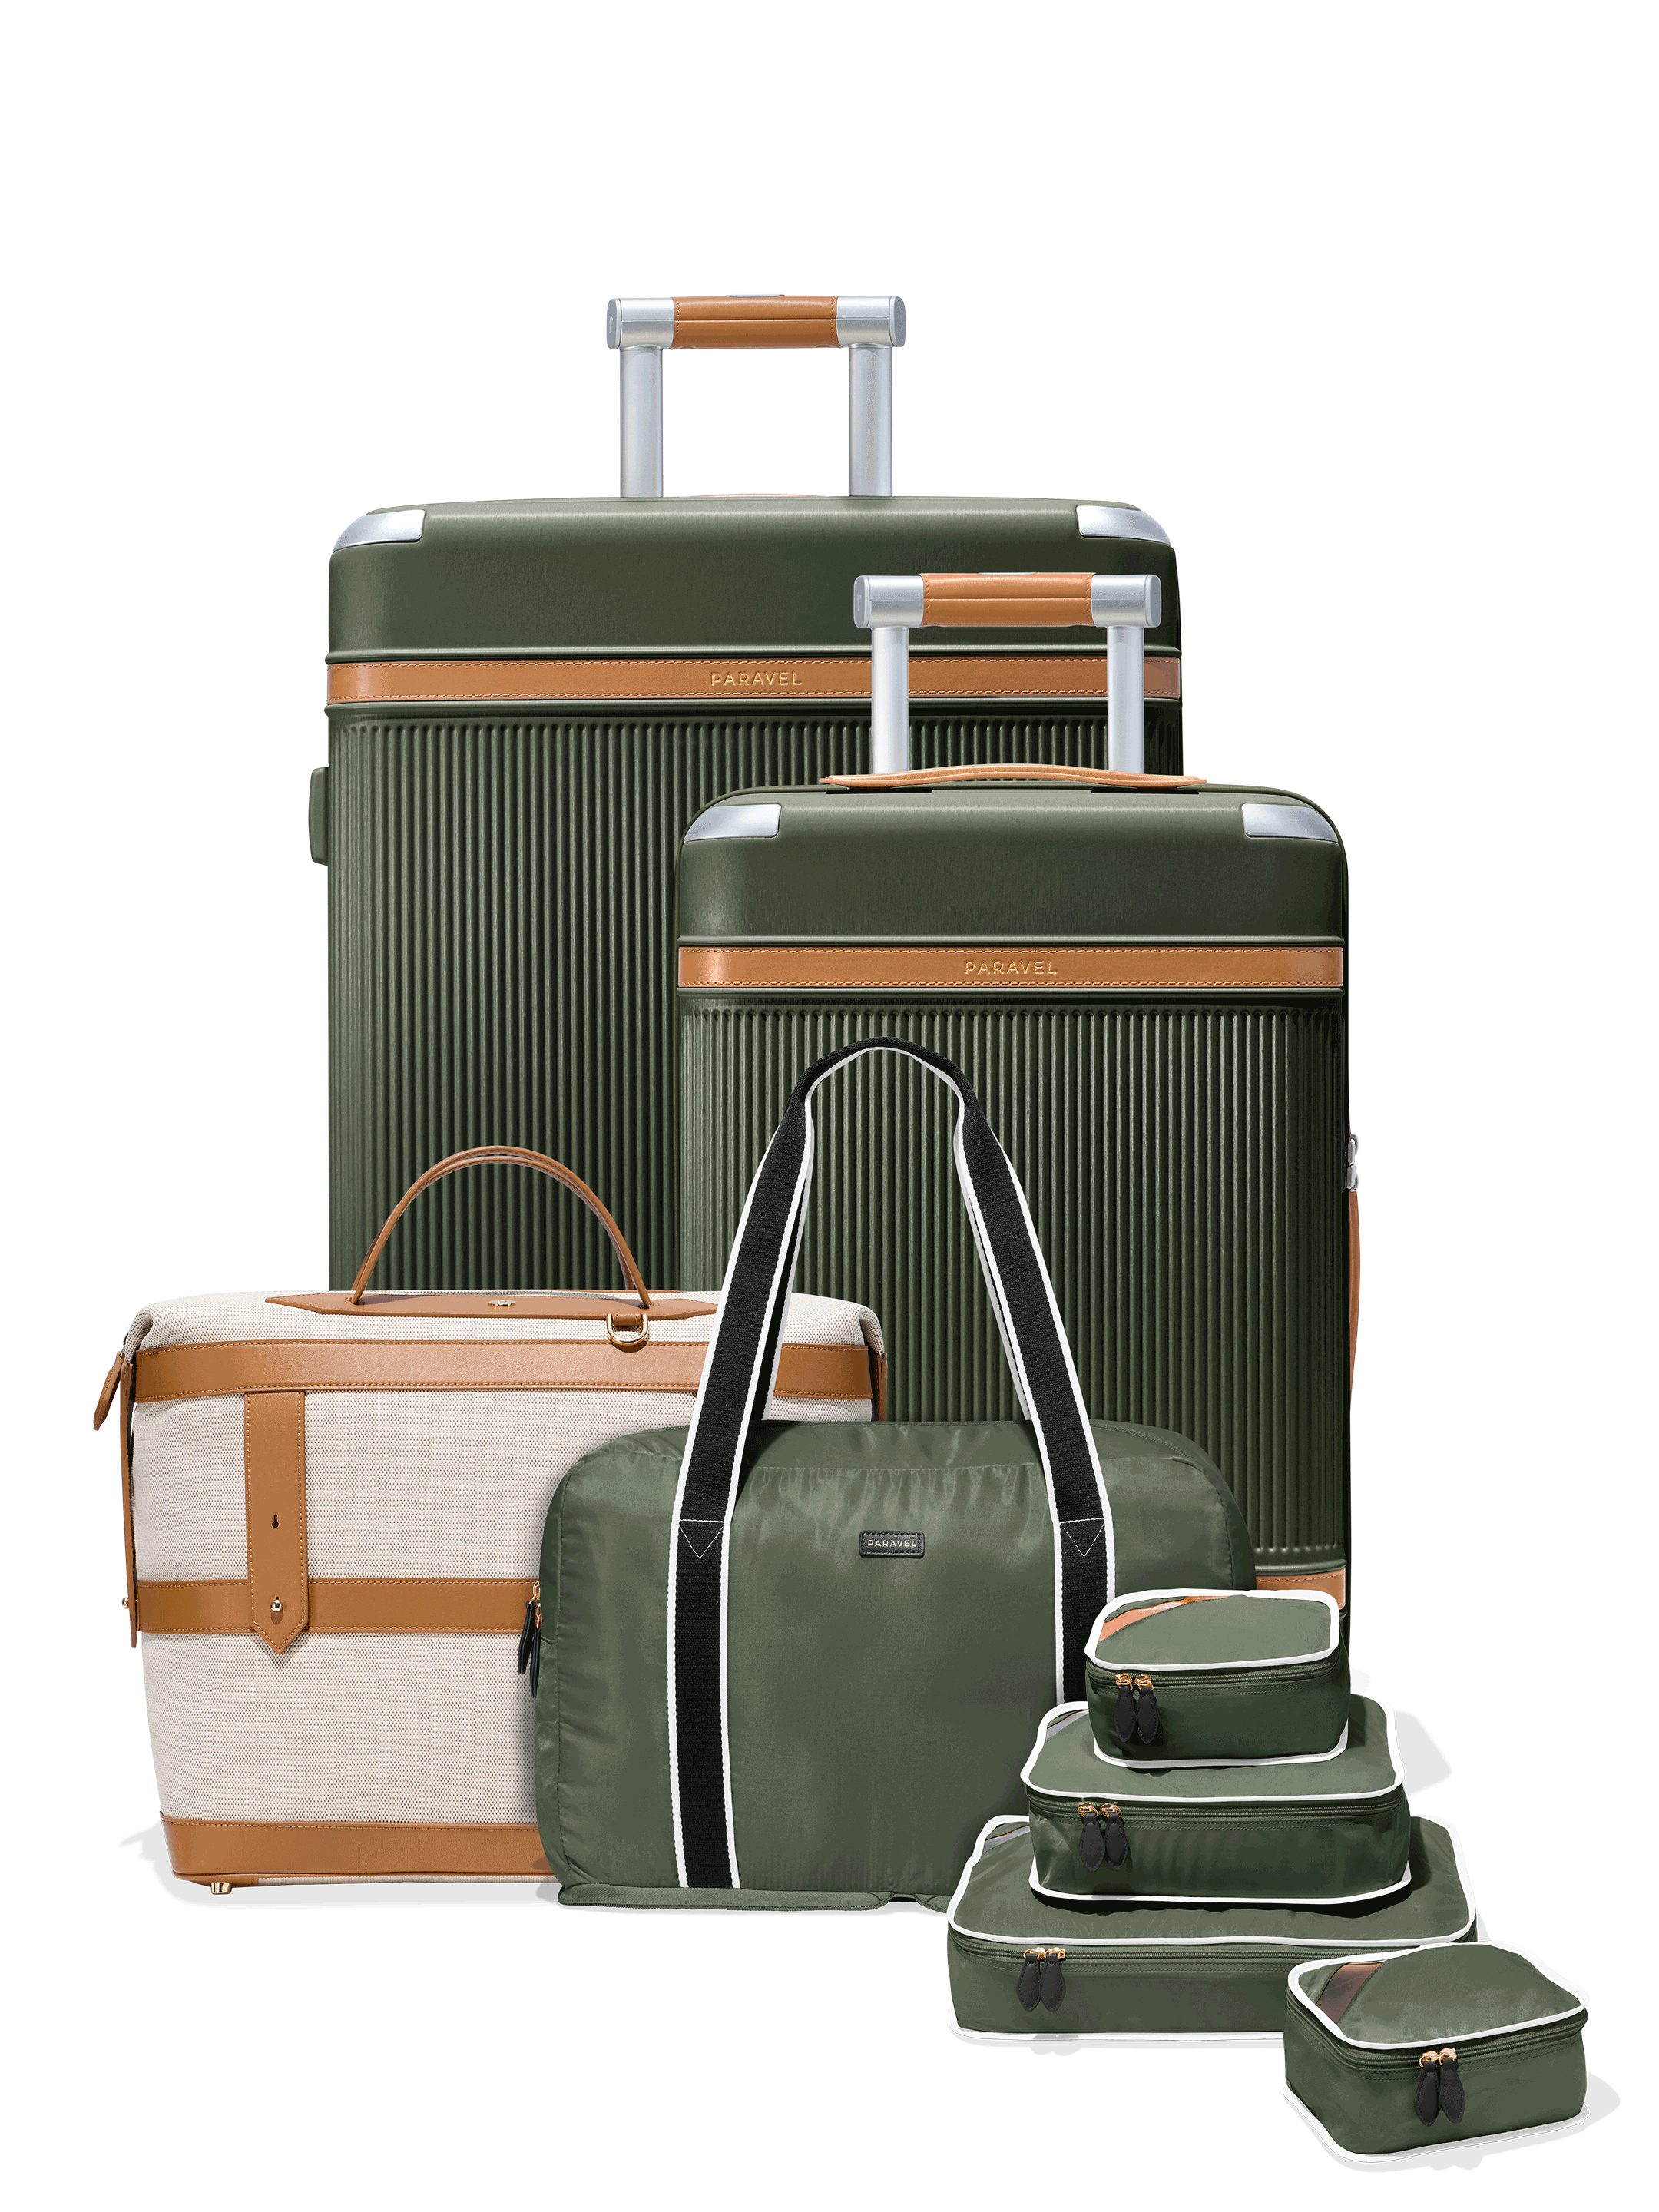 Best Carry-On Suitcase - Sage Green - 22 | Monos Luggage & Travel Accessories